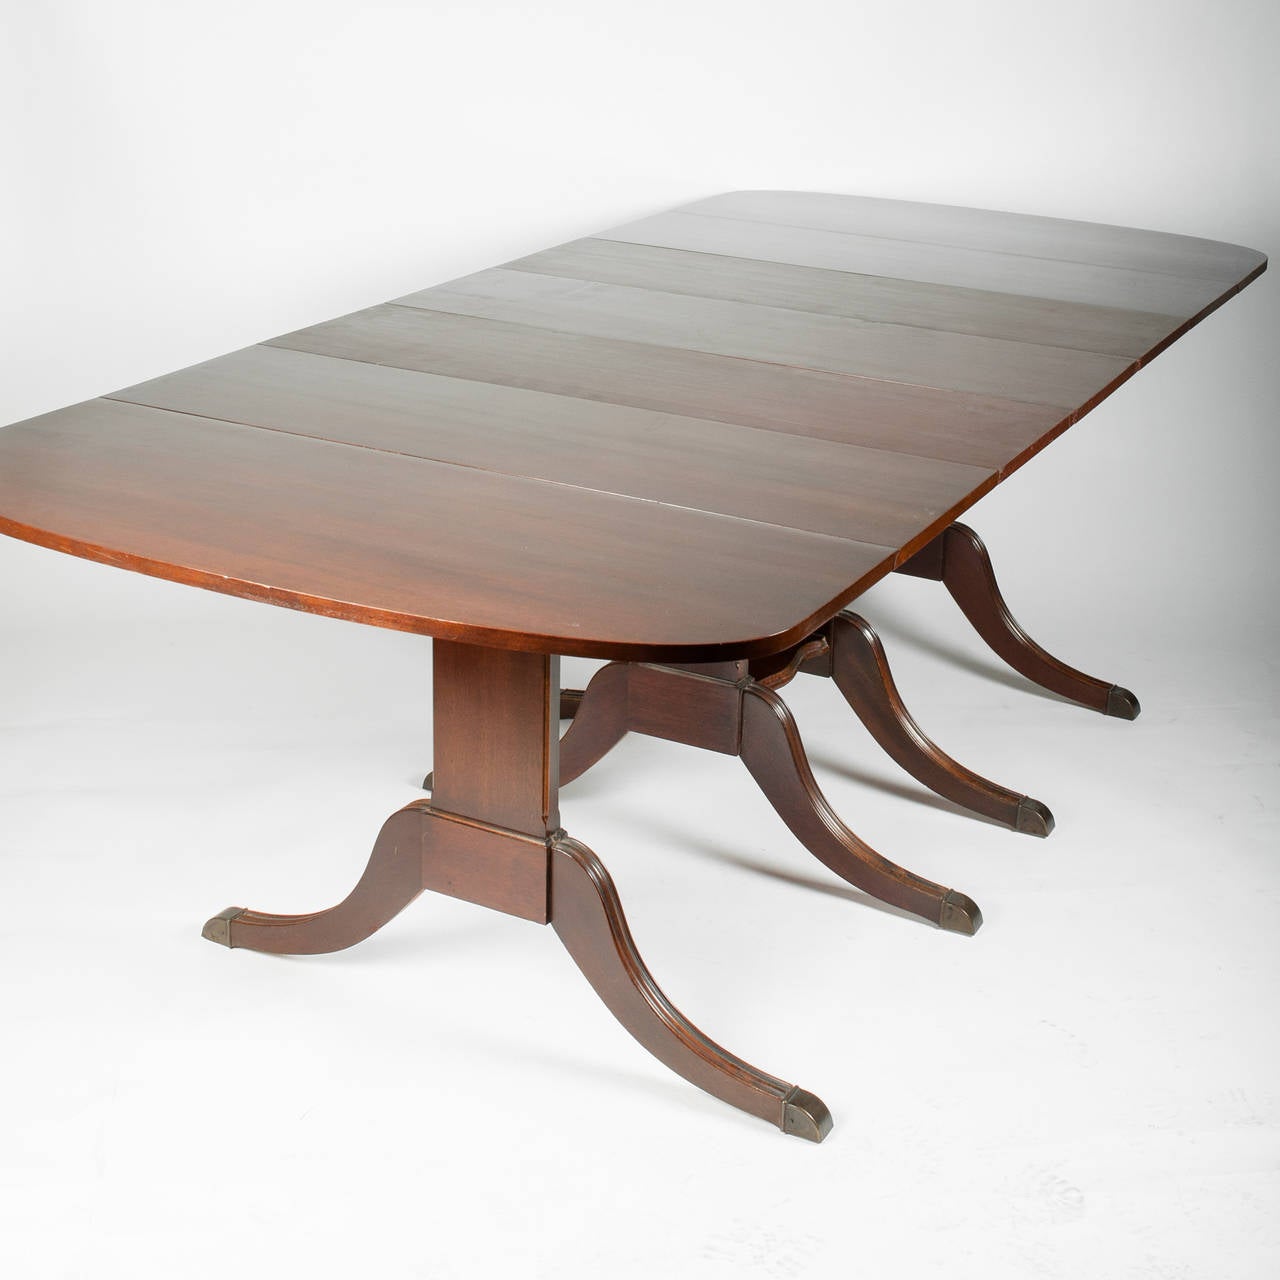 Duncan Phyfe Style Drop Leaf Extension Table For Sale At 1stdibs